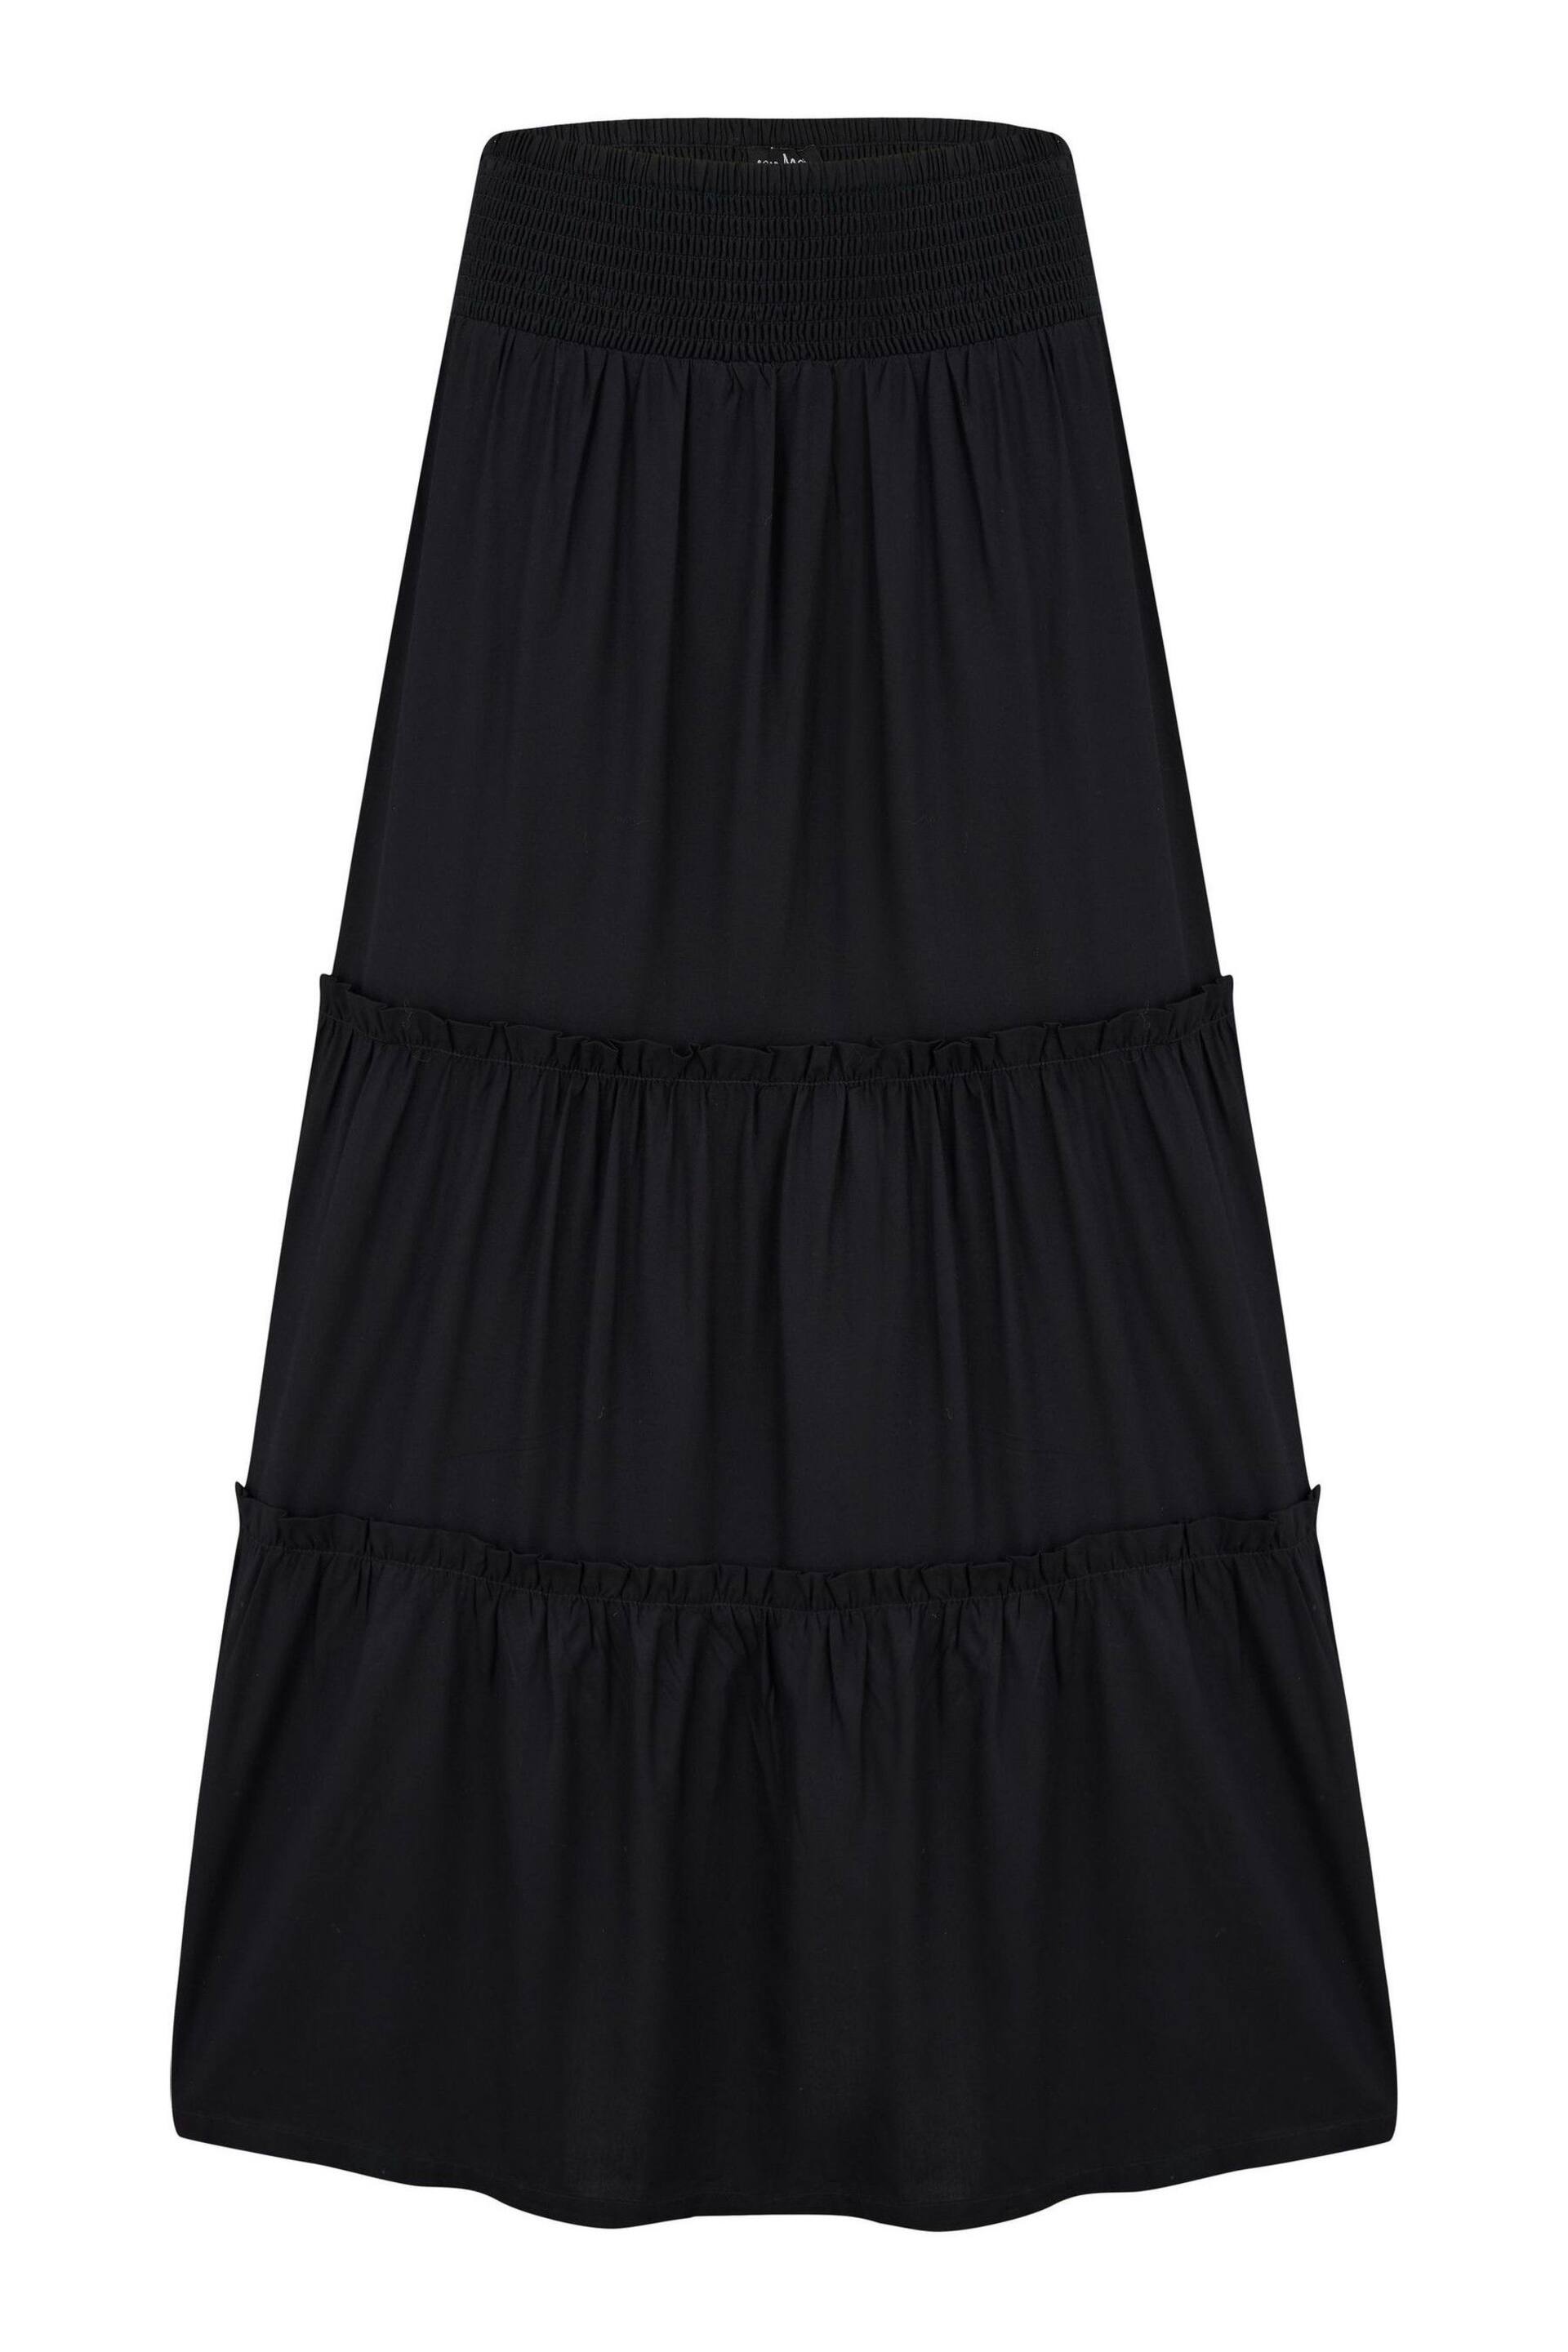 Pour Moi Black Tahlia Frill Tiered Maxi Skirt - Image 3 of 4